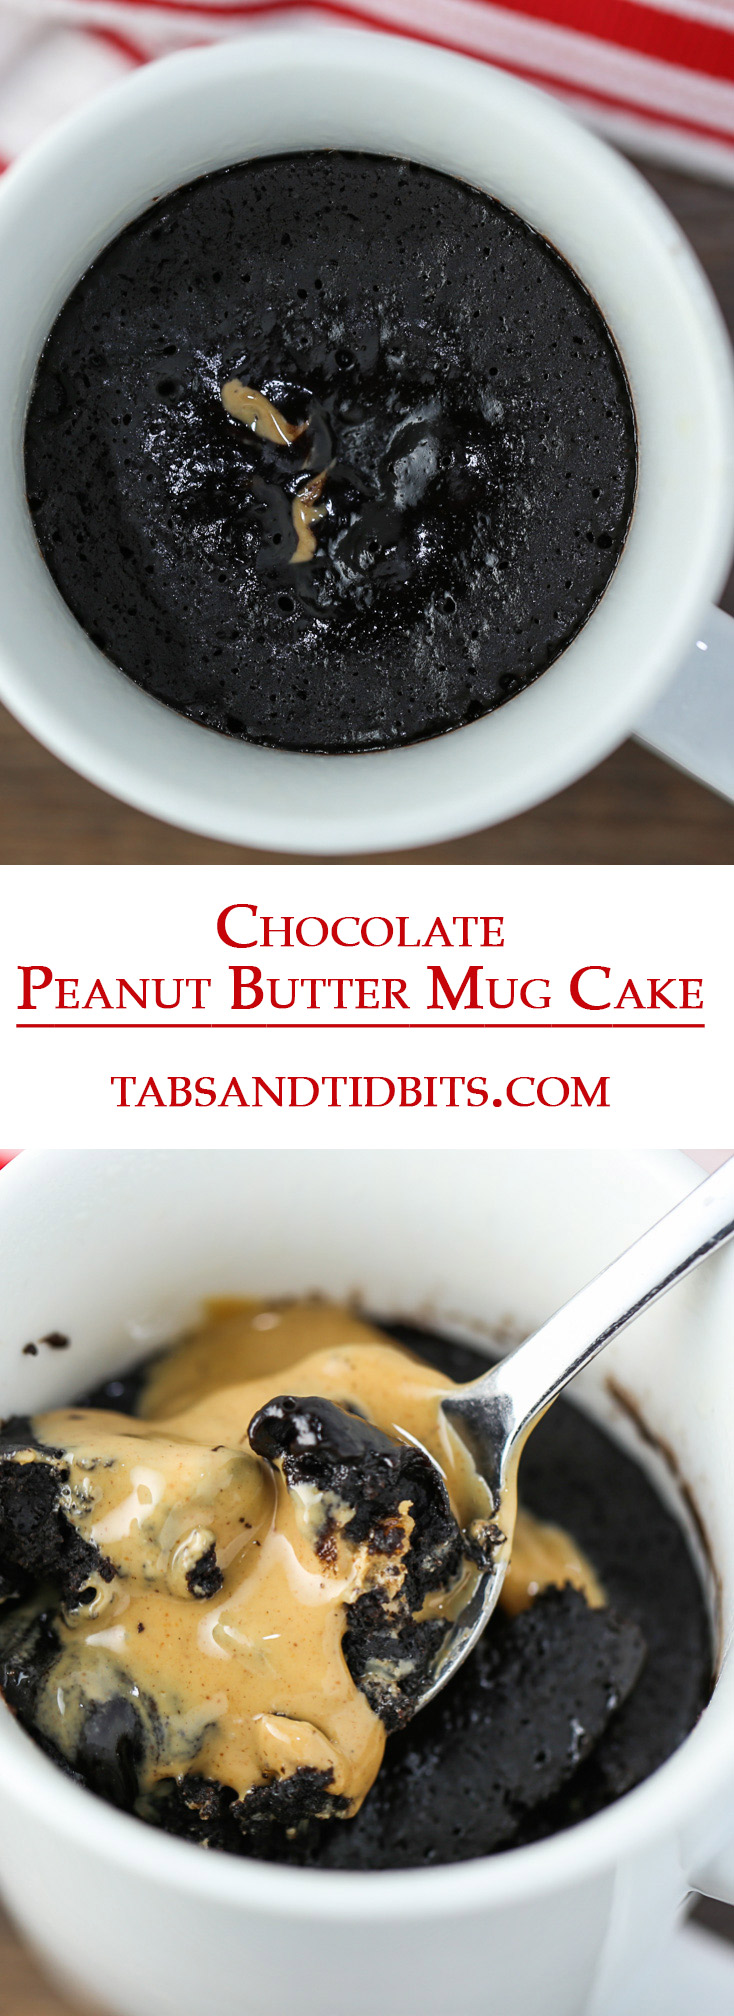 This Chocolate Peanut Butter Mug Cake is a sweet and satisfying quick dessert that is moist, delicate, and full of gooey deliciousness!